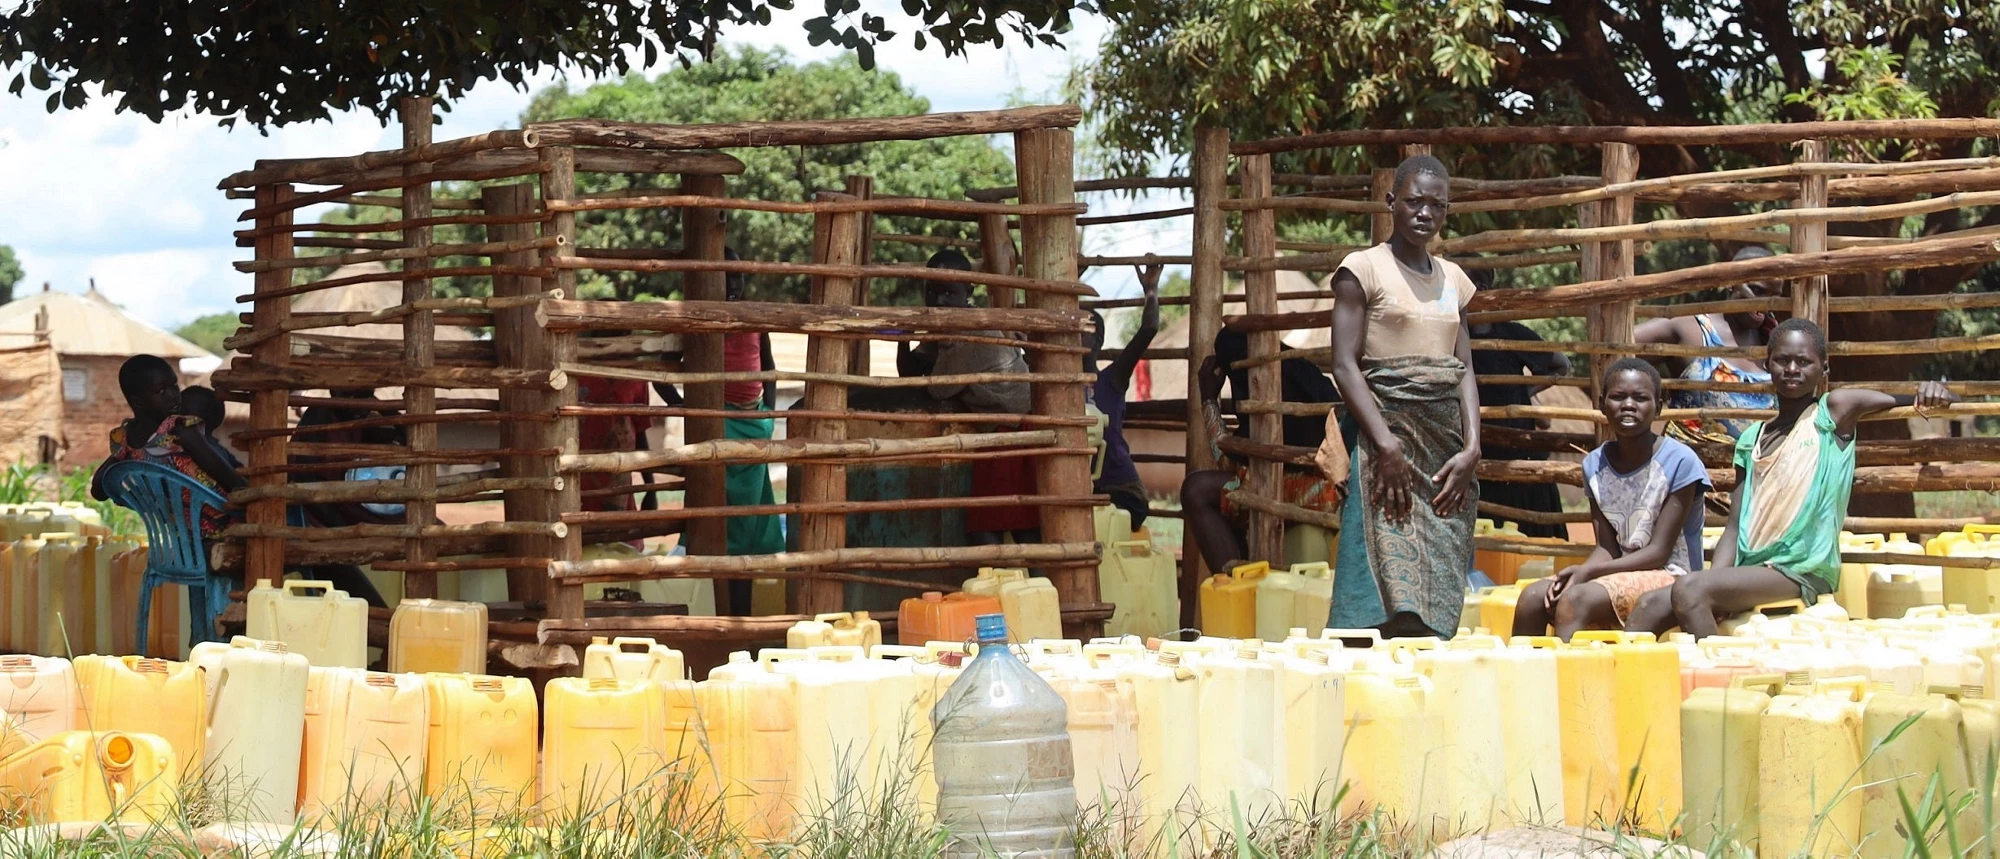 Water service situation in Uganda